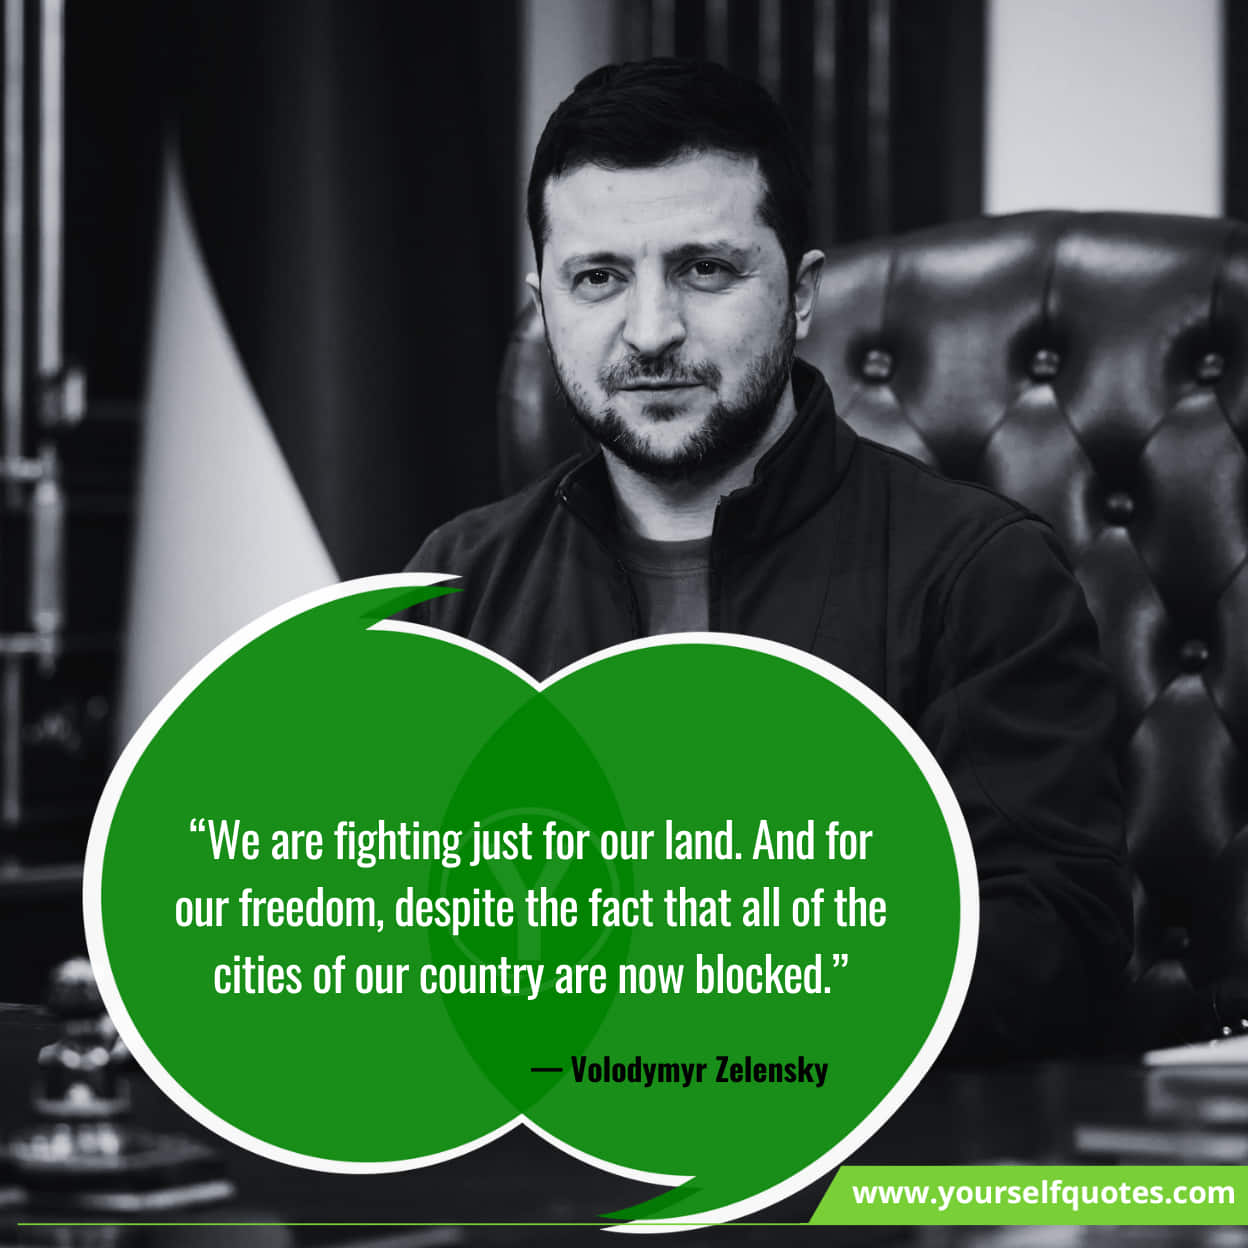 Famous Volodymyr Zelensky Quotes On Freedom